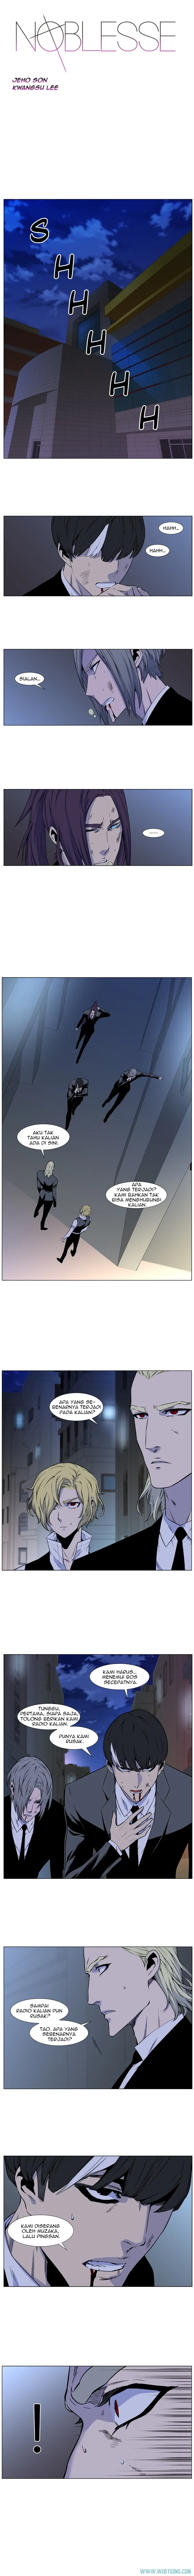 Noblesse Chapter 480 - 55